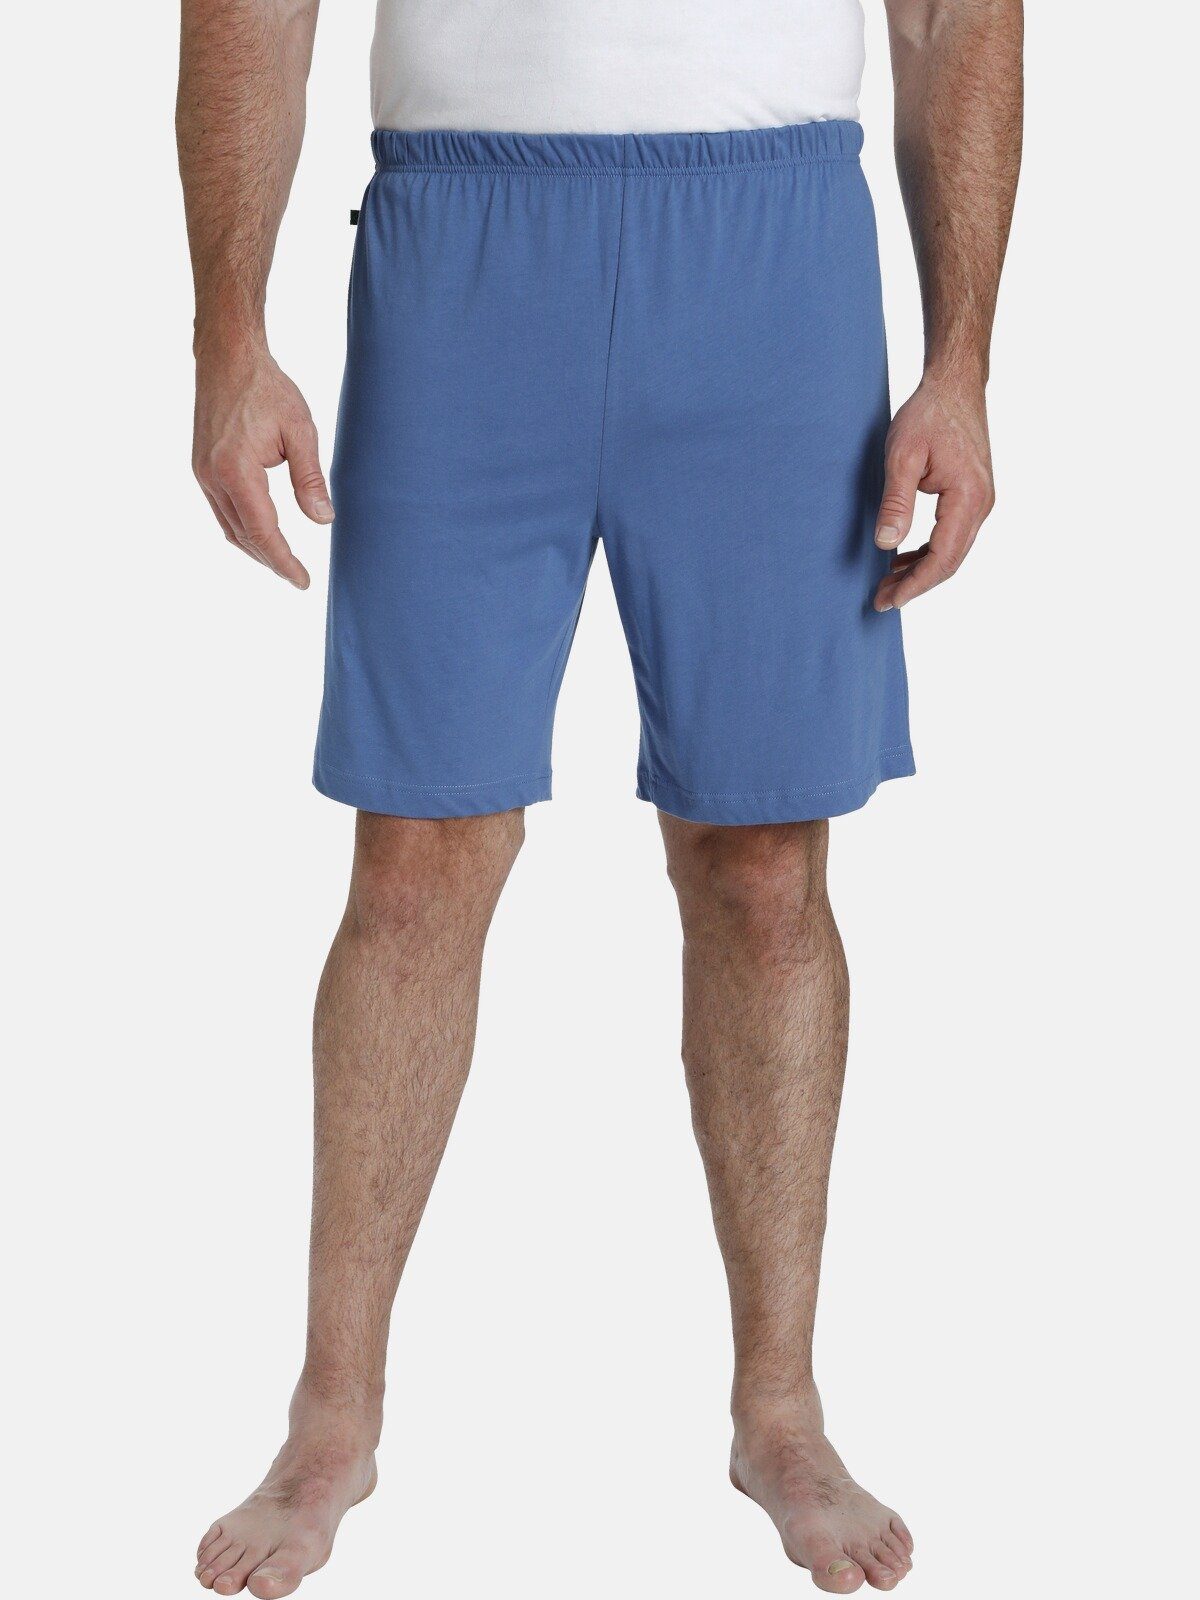 Charles Colby Schlafhose LORD MYCROFT leichte bequeme Relaxshorts blau